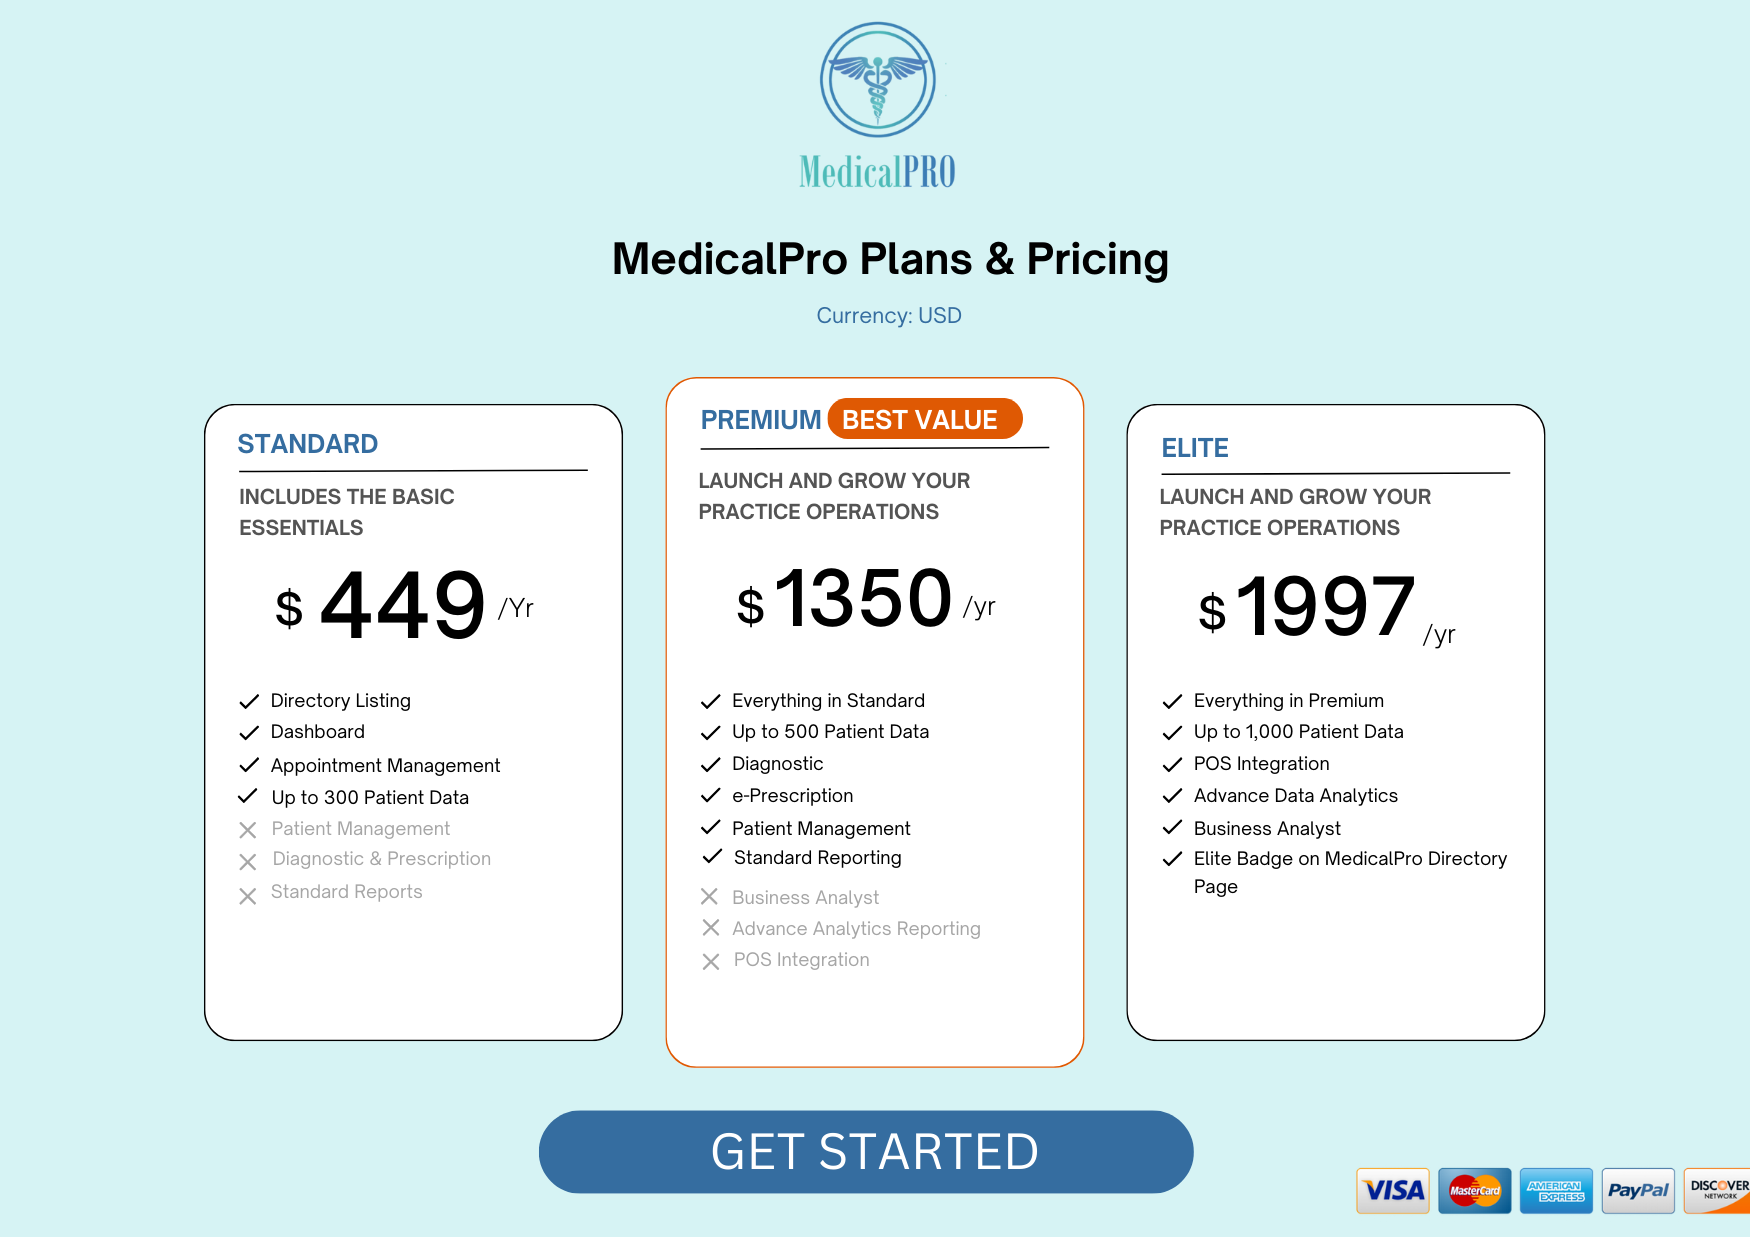 MedicalPro Plans and Pricing